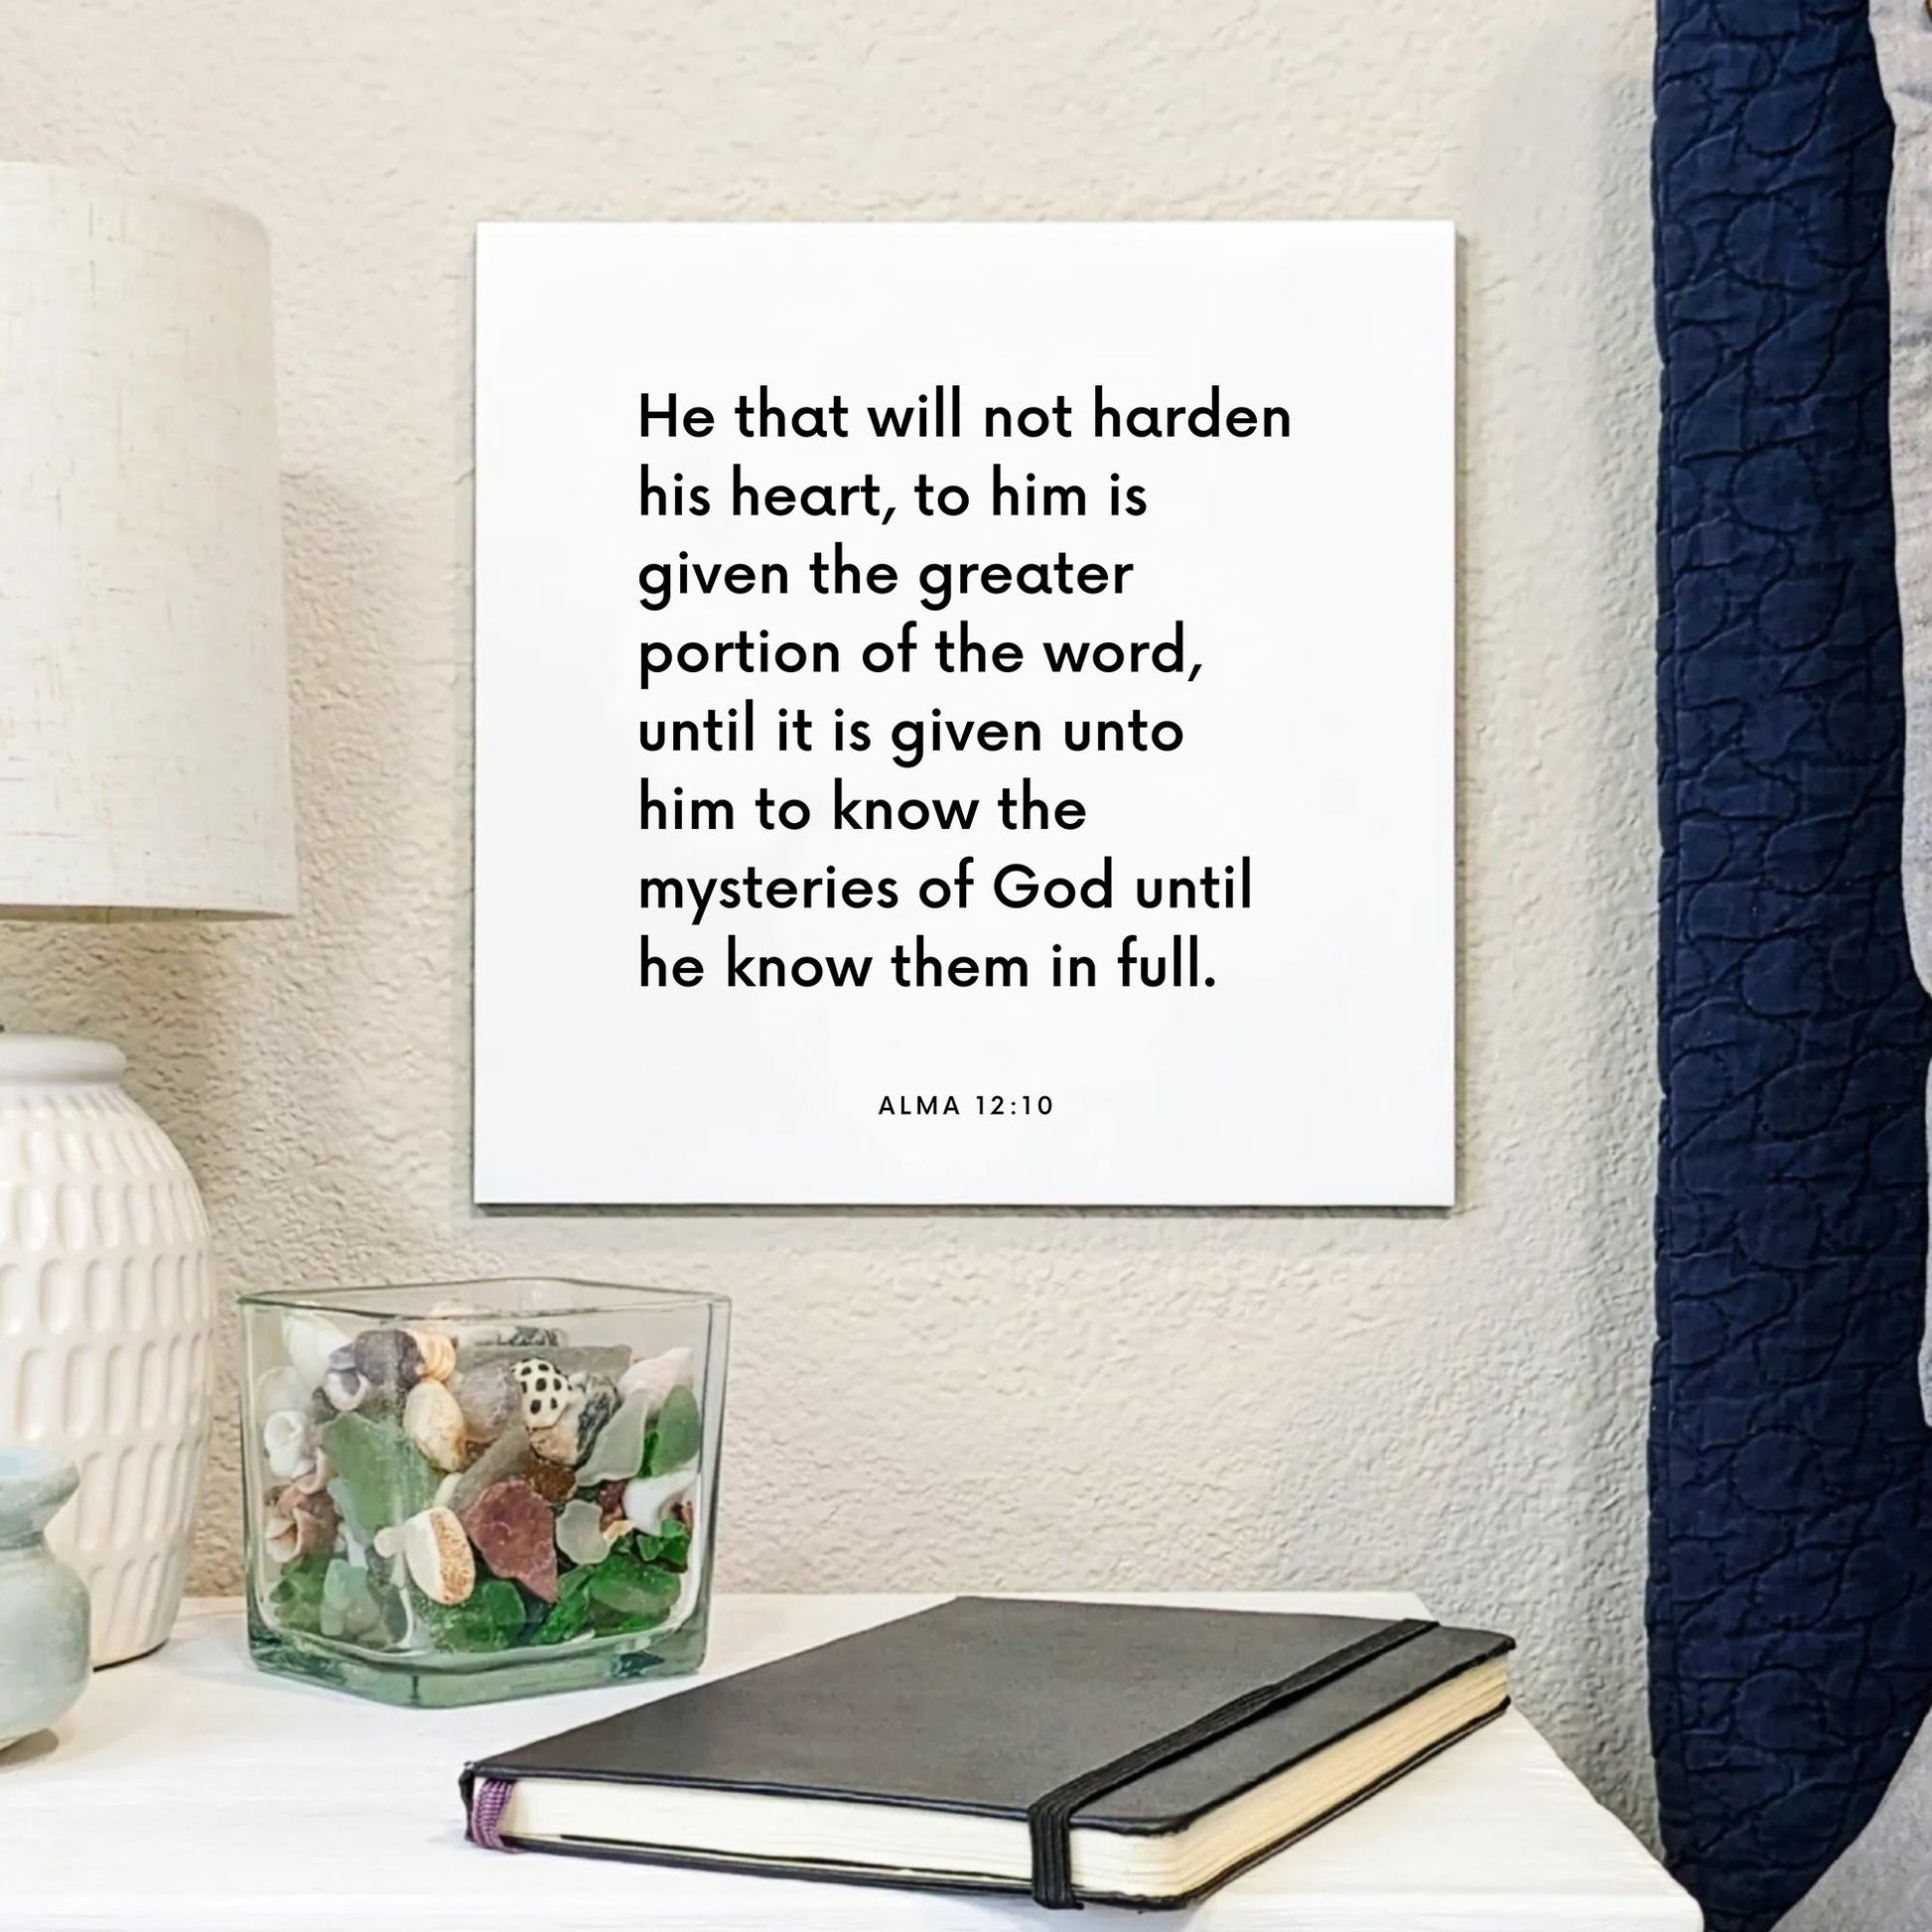 Bedside mouting of the scripture tile for Alma 12:10 - "He that will not harden his heart"